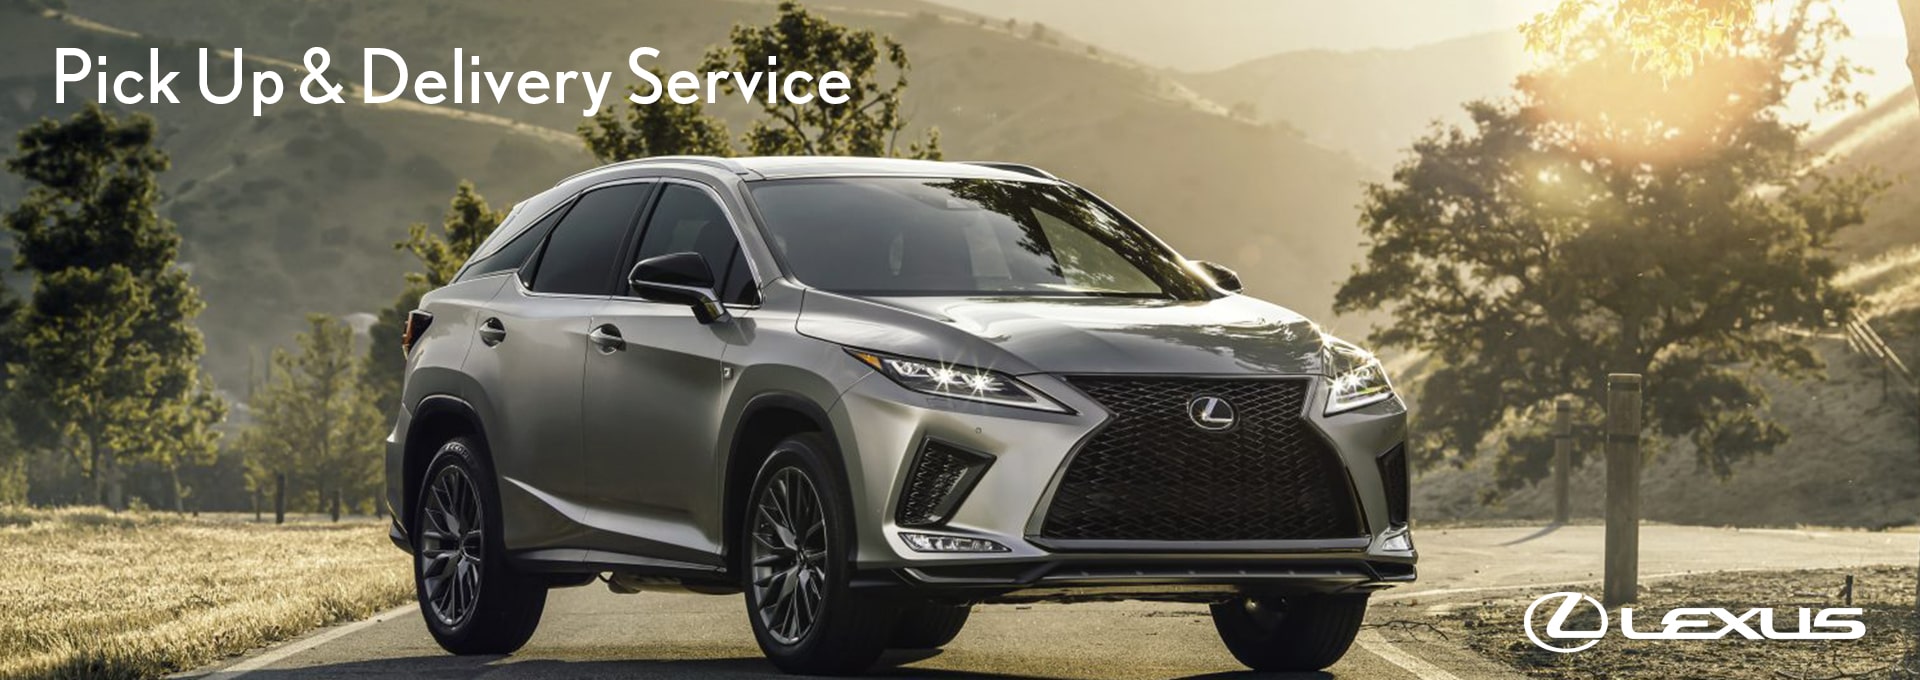 Germain Lexus of Dublin Pick Up & Delivery Service